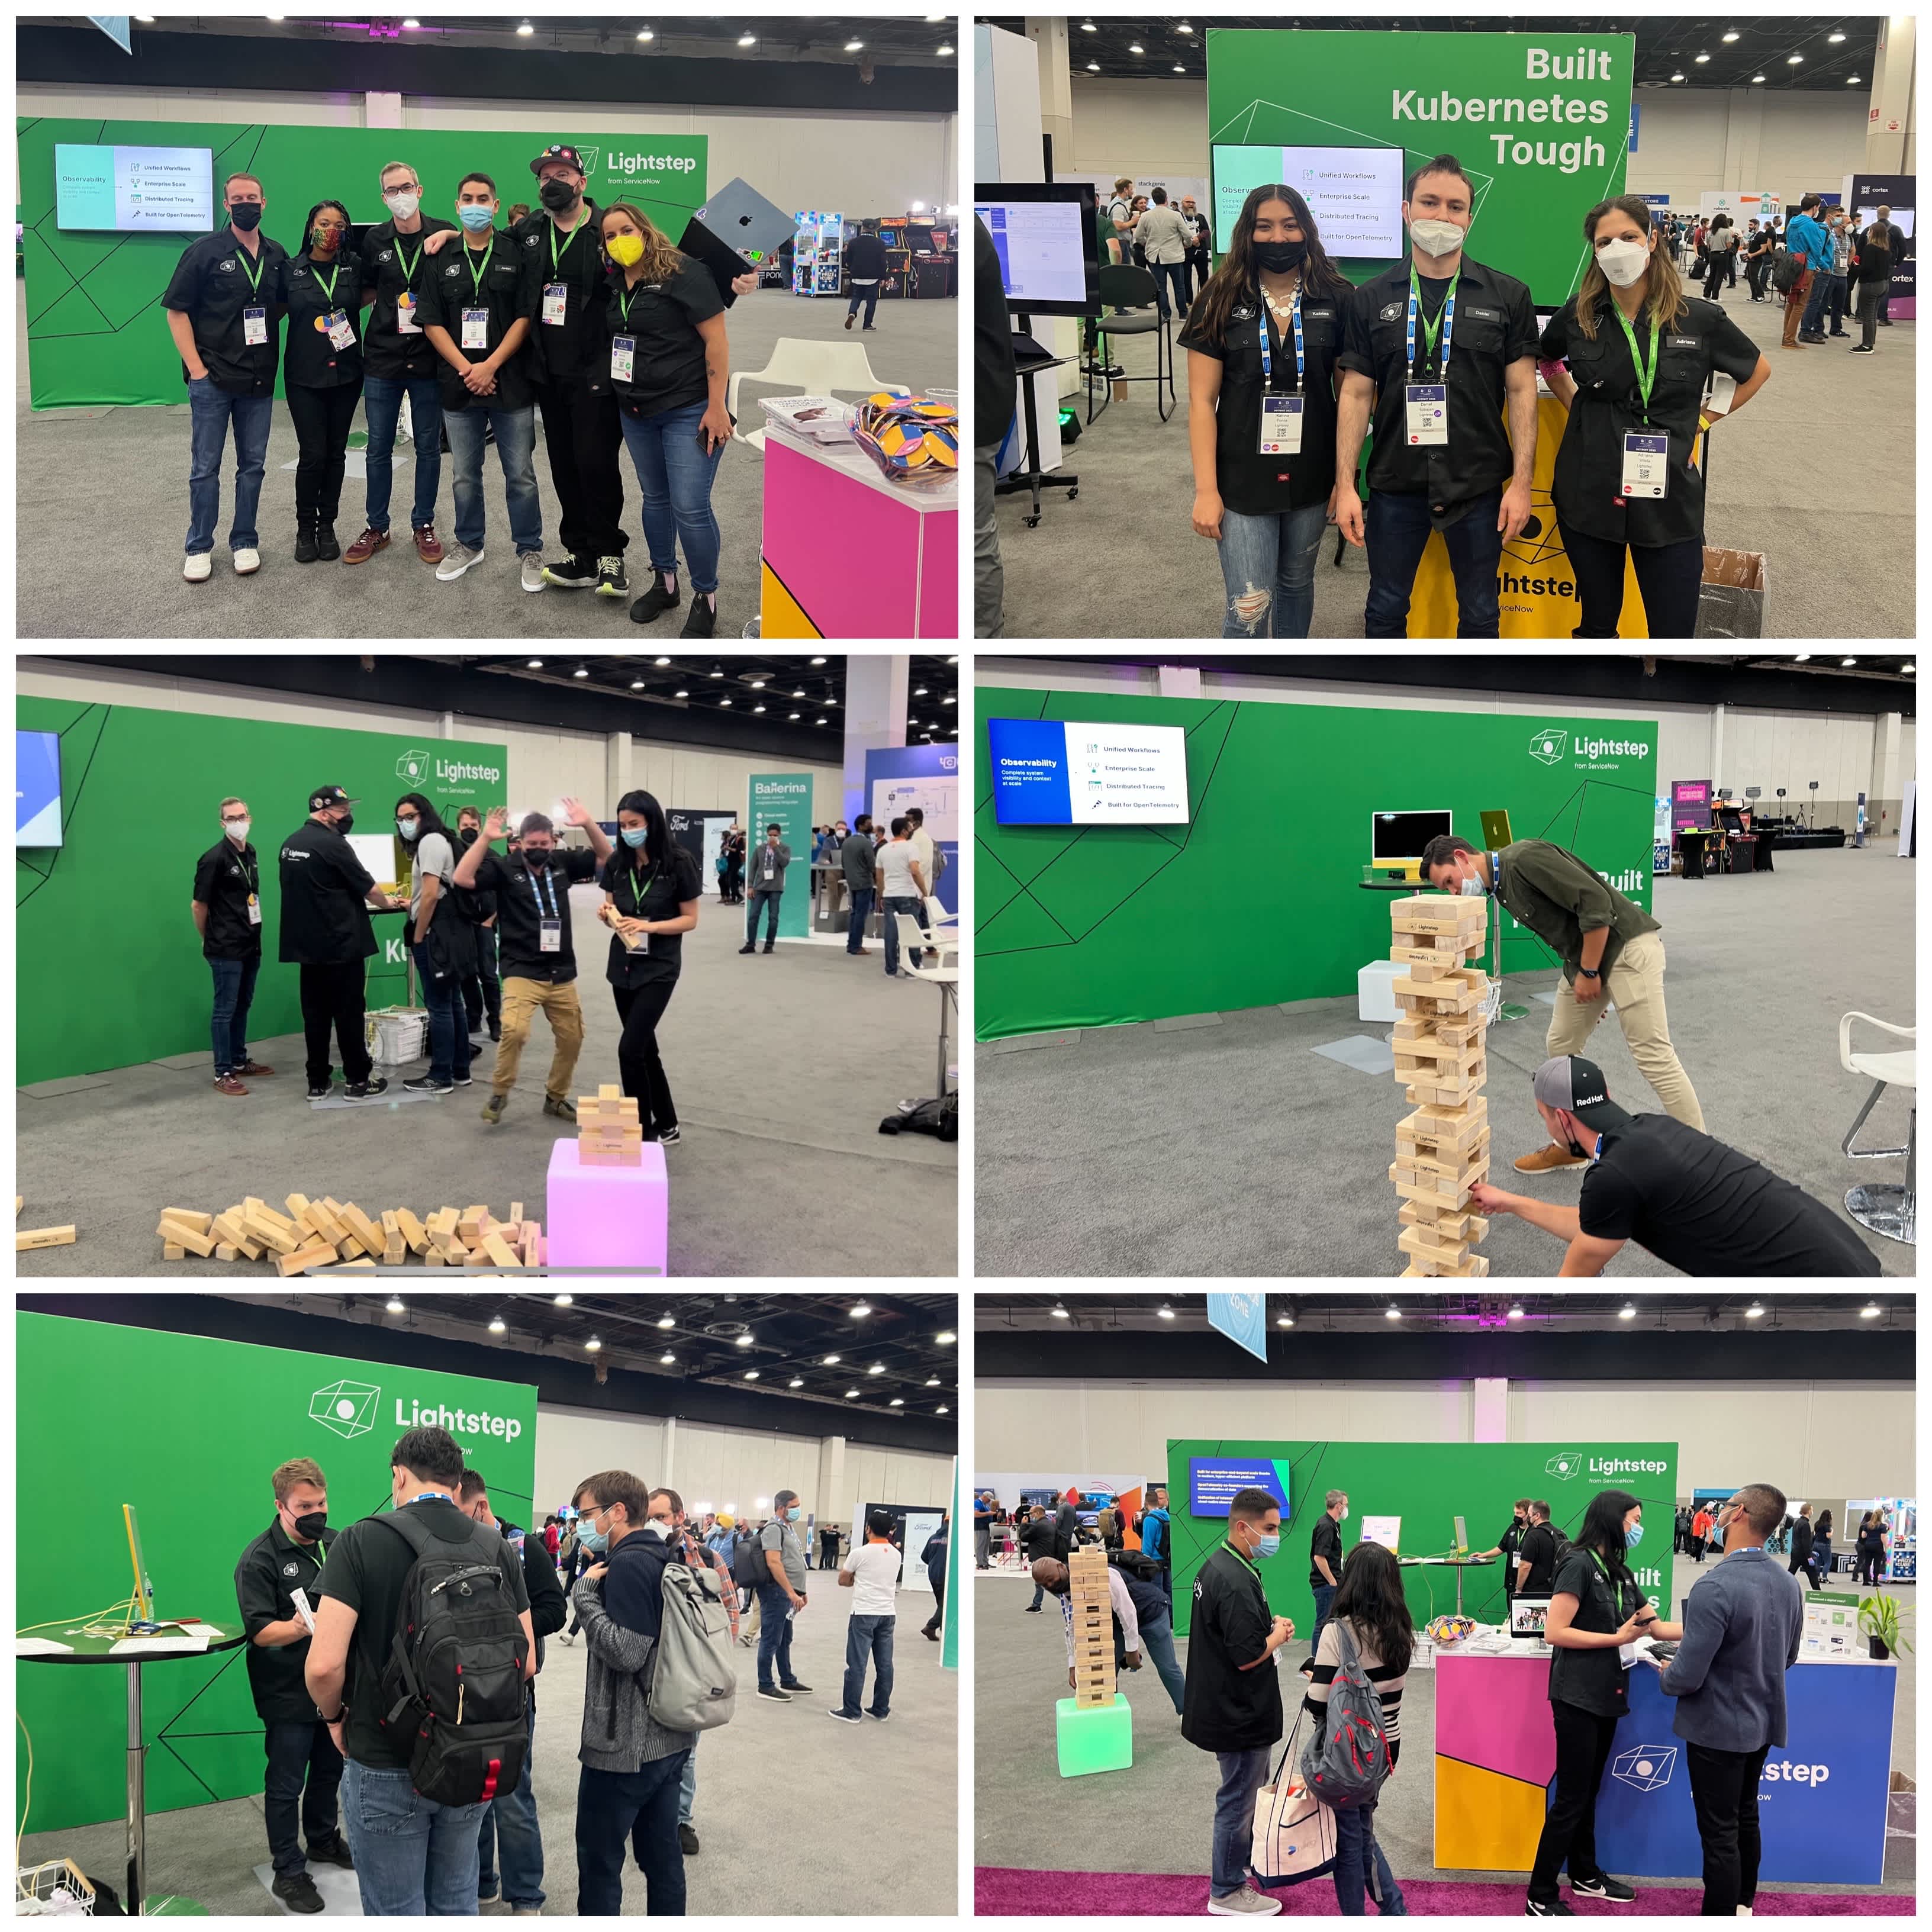 Collage of the Lightstep booth at KubeCon